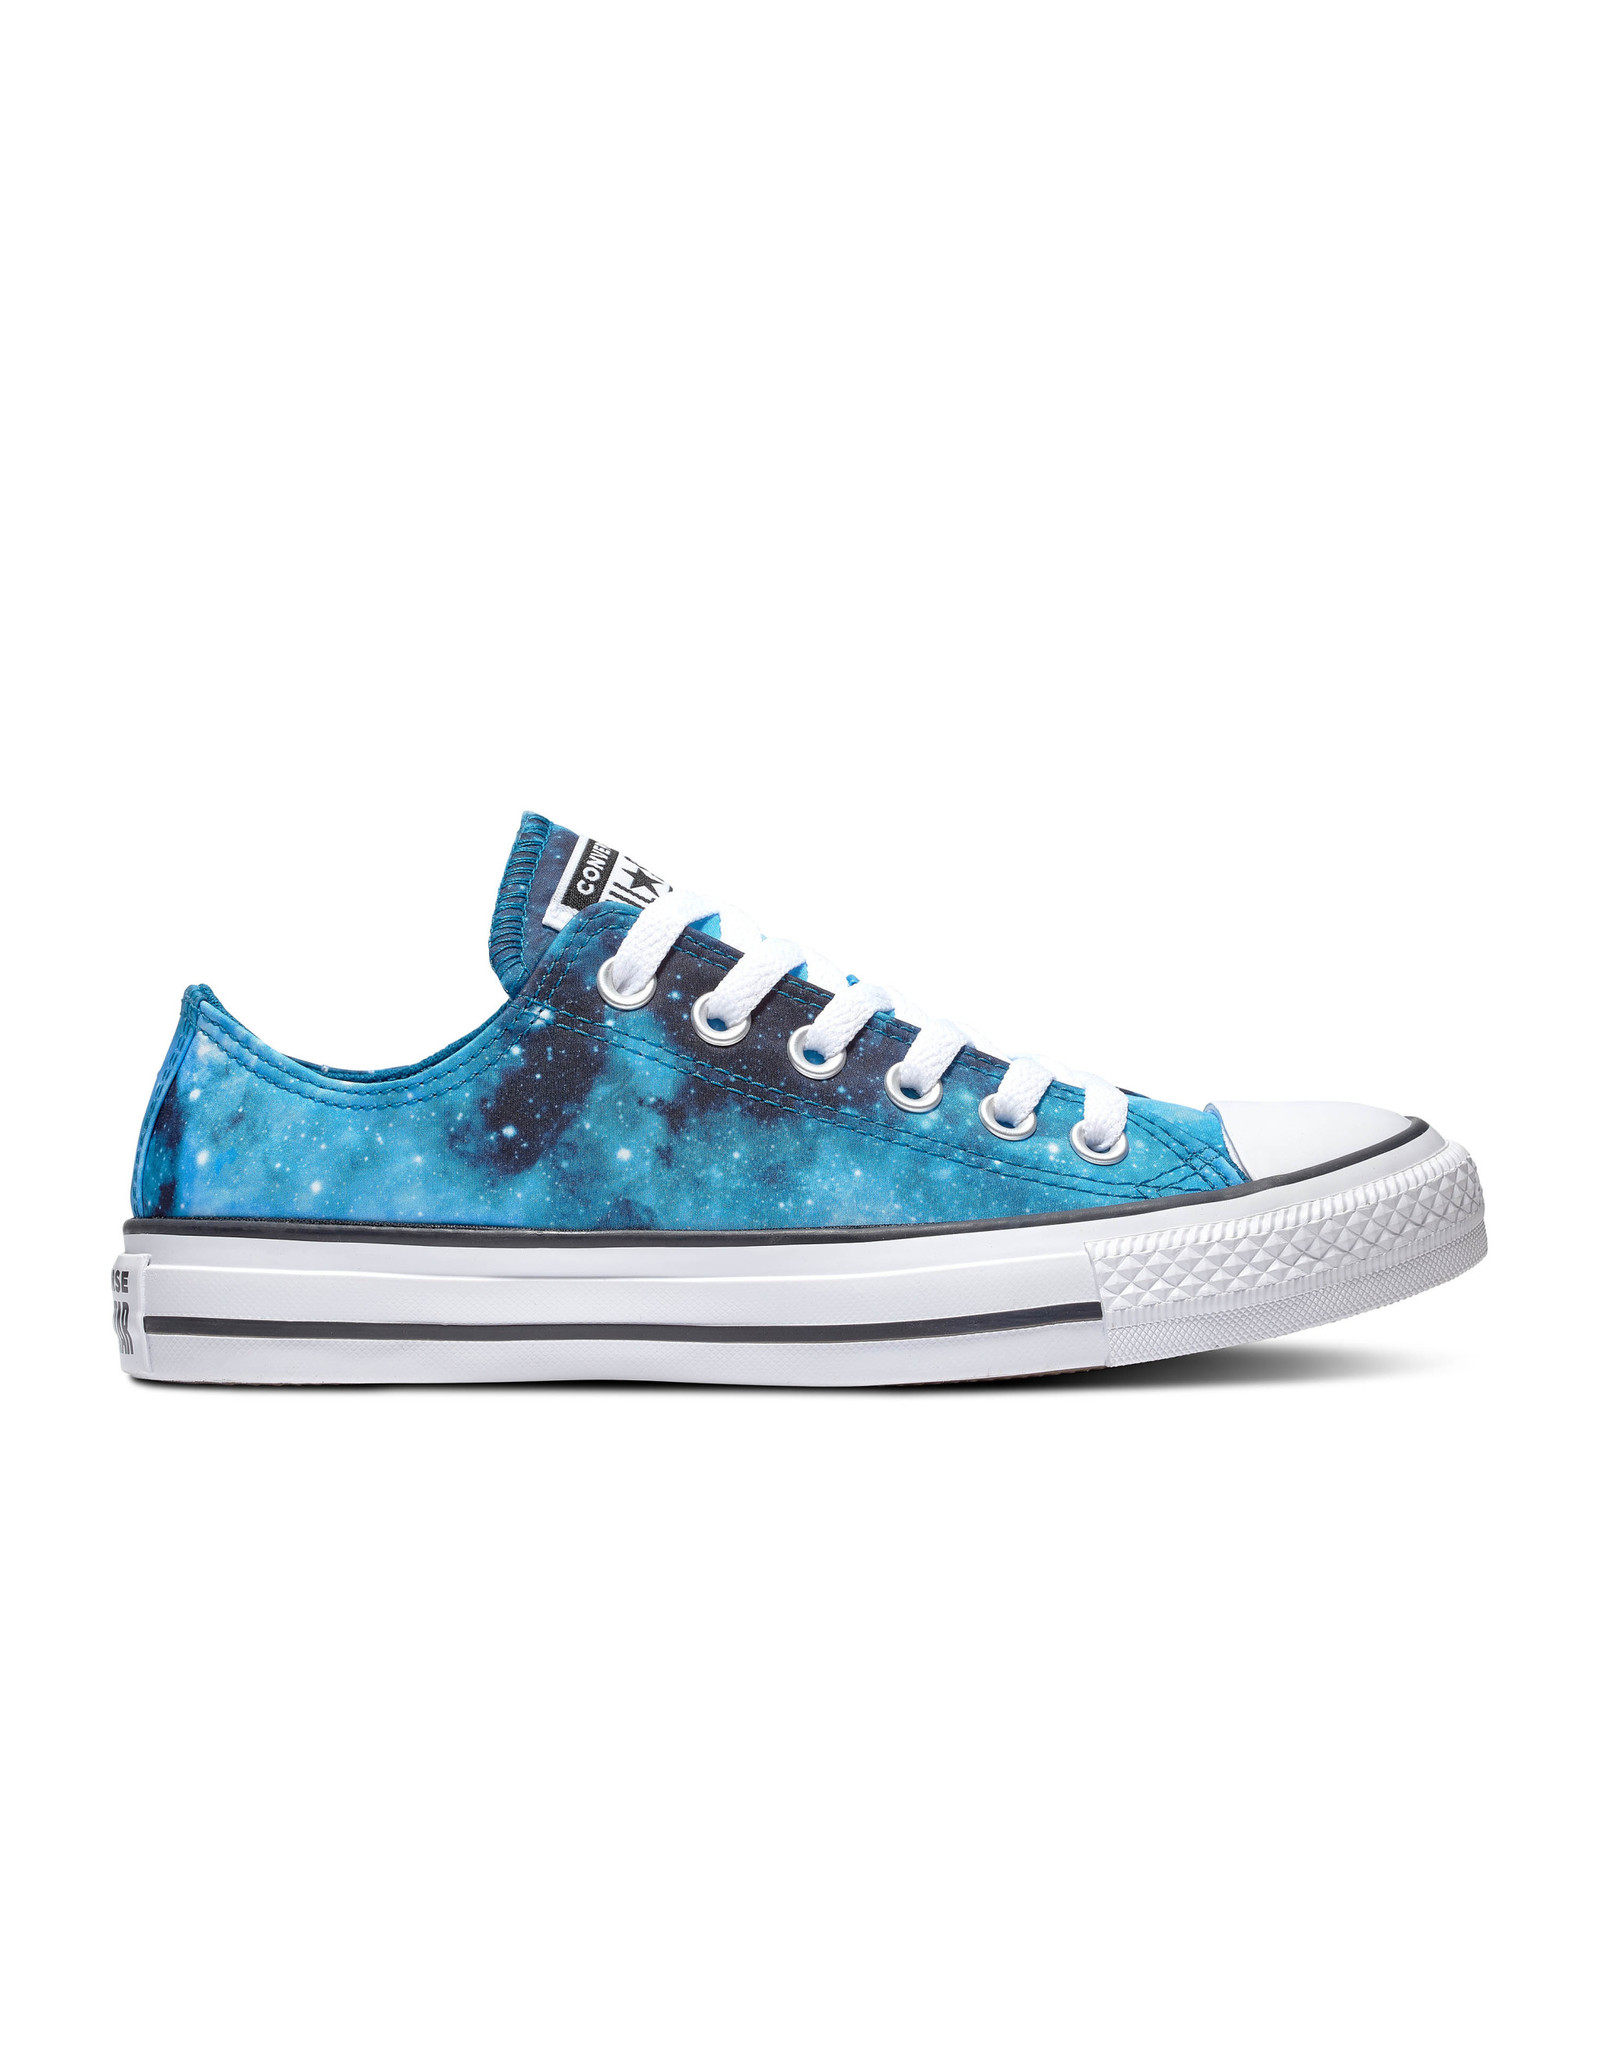 CHUCK TAYLOR ALL STAR OX GREEN ABYSS/TURBO GREEN/WHITE C13GALT-565211C